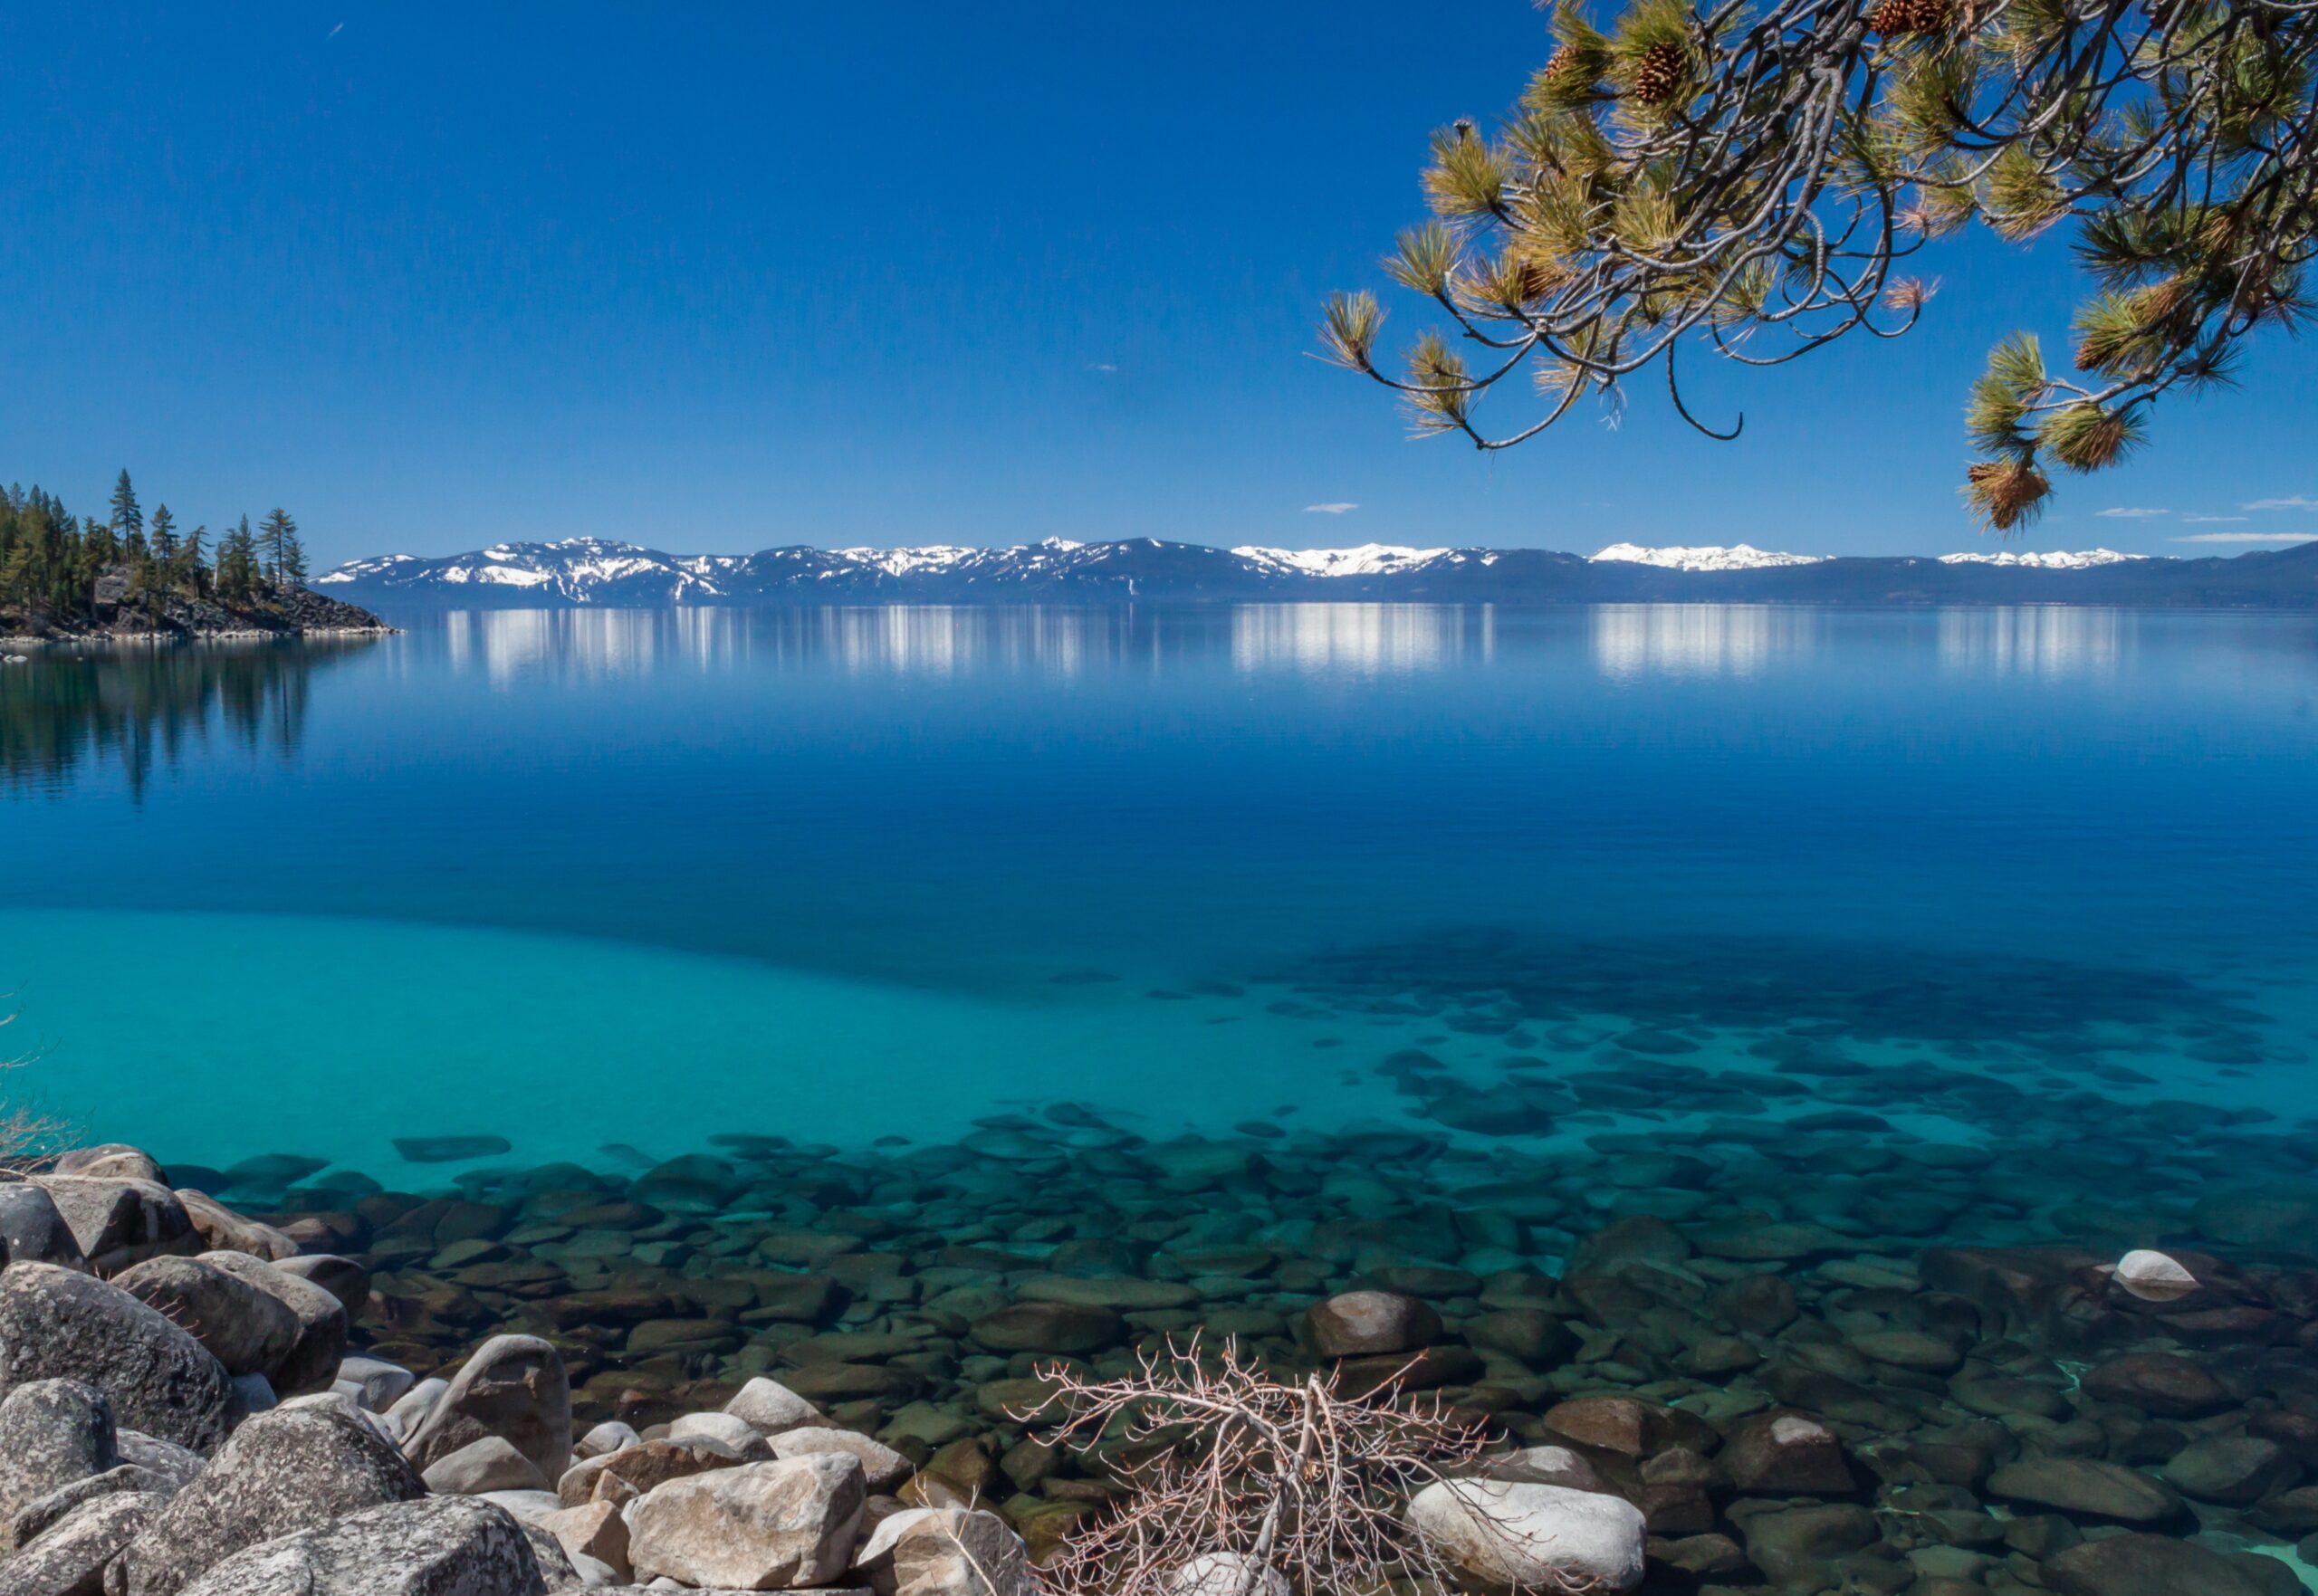 Lake Tahoe is a popular destination and filming location of the newest Top Gun film.
pictured: The turquoise waters of Lake Tahoe with snowy mountains in the distance 